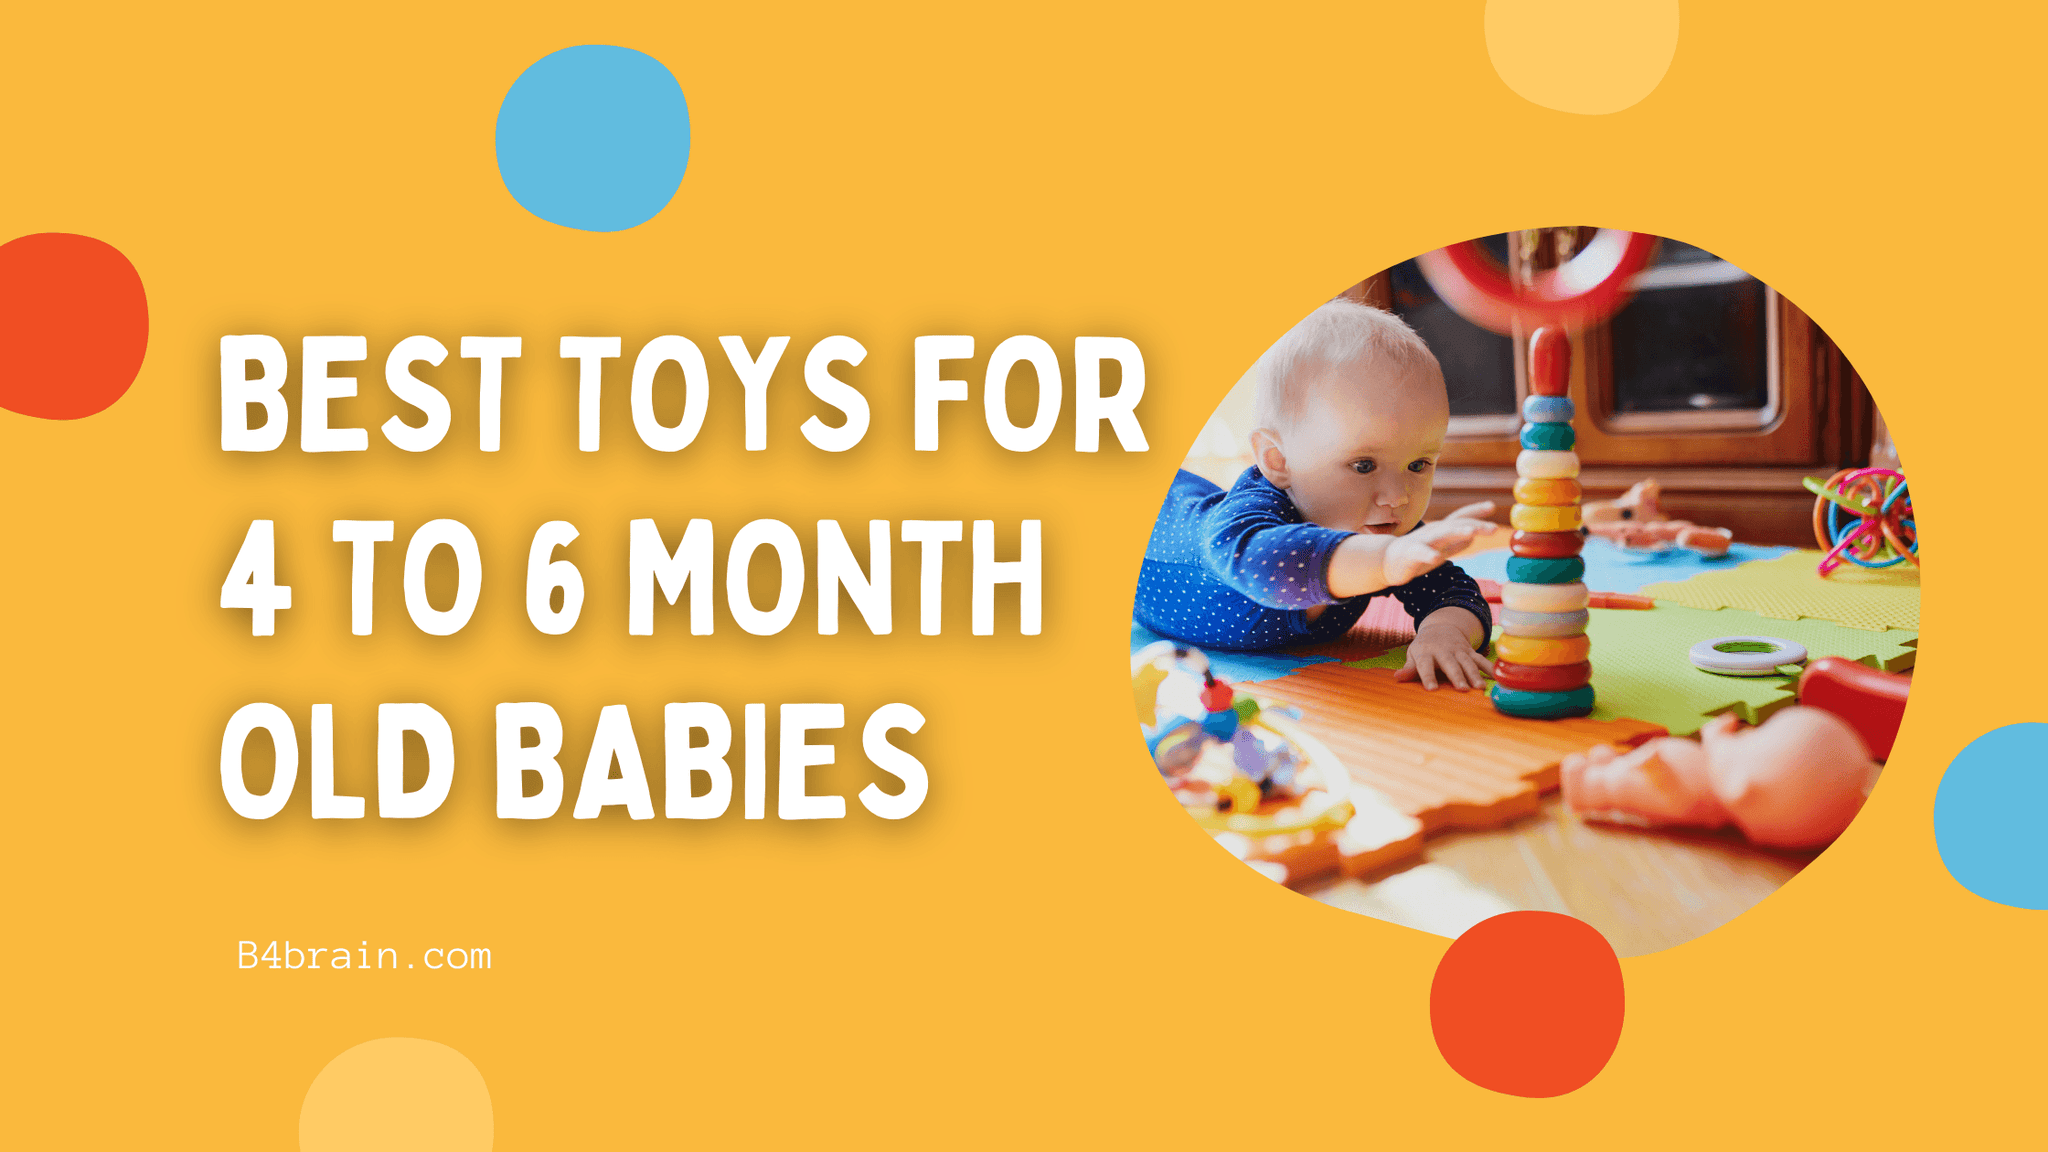 Best Toys For 4 to 6 Month Old Babies - B4brain